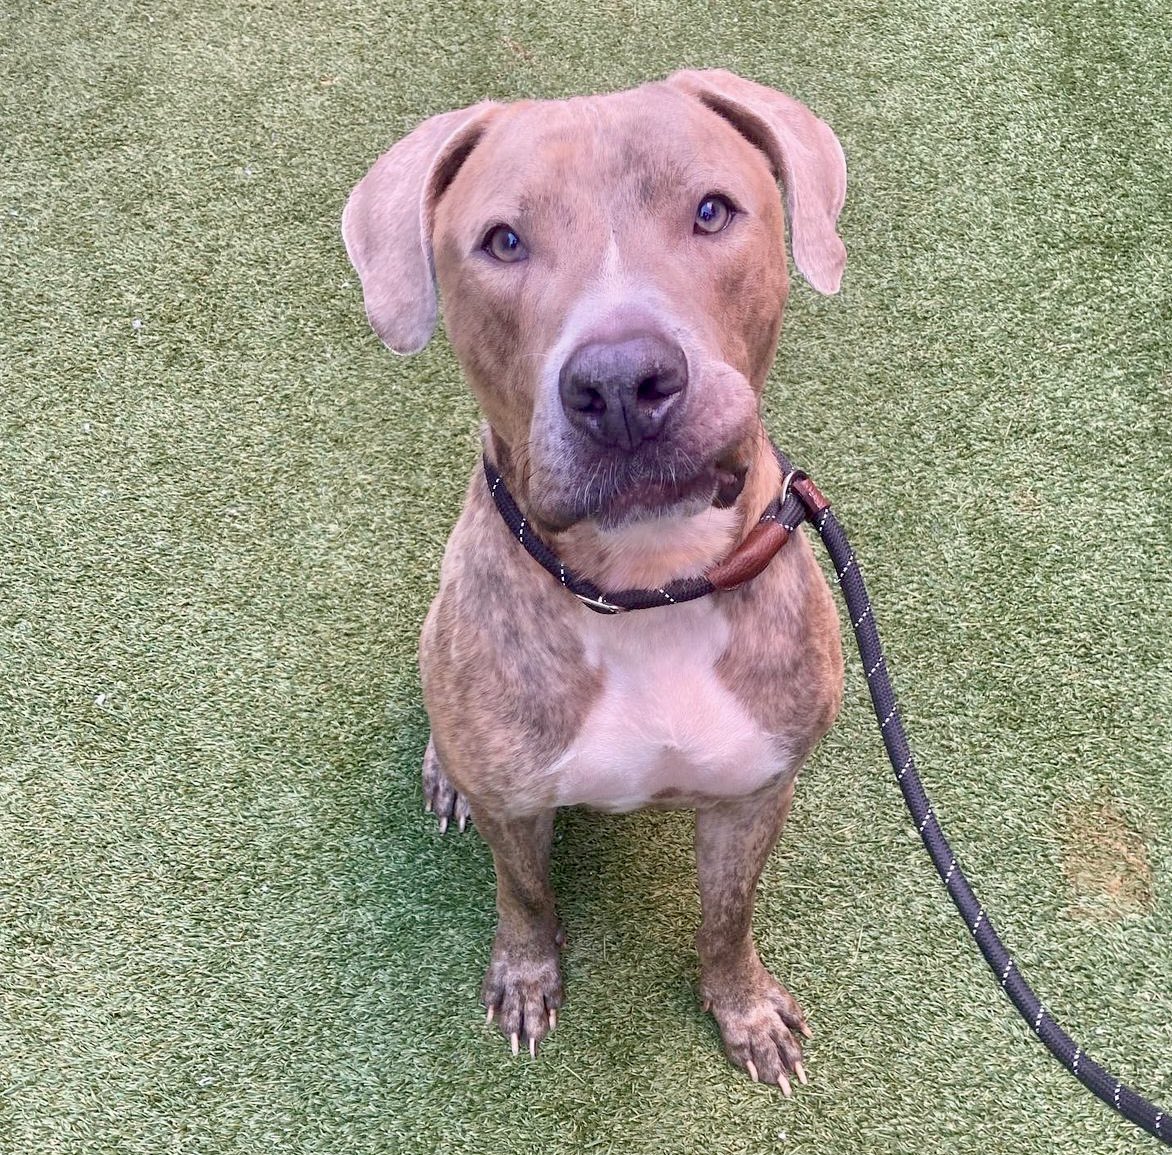 #AdoptMe #FosterMe ♥️ #NYCACC #NewYork 🇺🇸 🐶 Mega 😍 is still waiting for a pawparent to notice him! New pics from a volunteer who says Mega is BIG DOG LOVE & super sweet 🍭 He can’t wait to meet you… Shelter is FULL. Can you foster? #FostersSaveLives nycacc.app/#/browse/134673